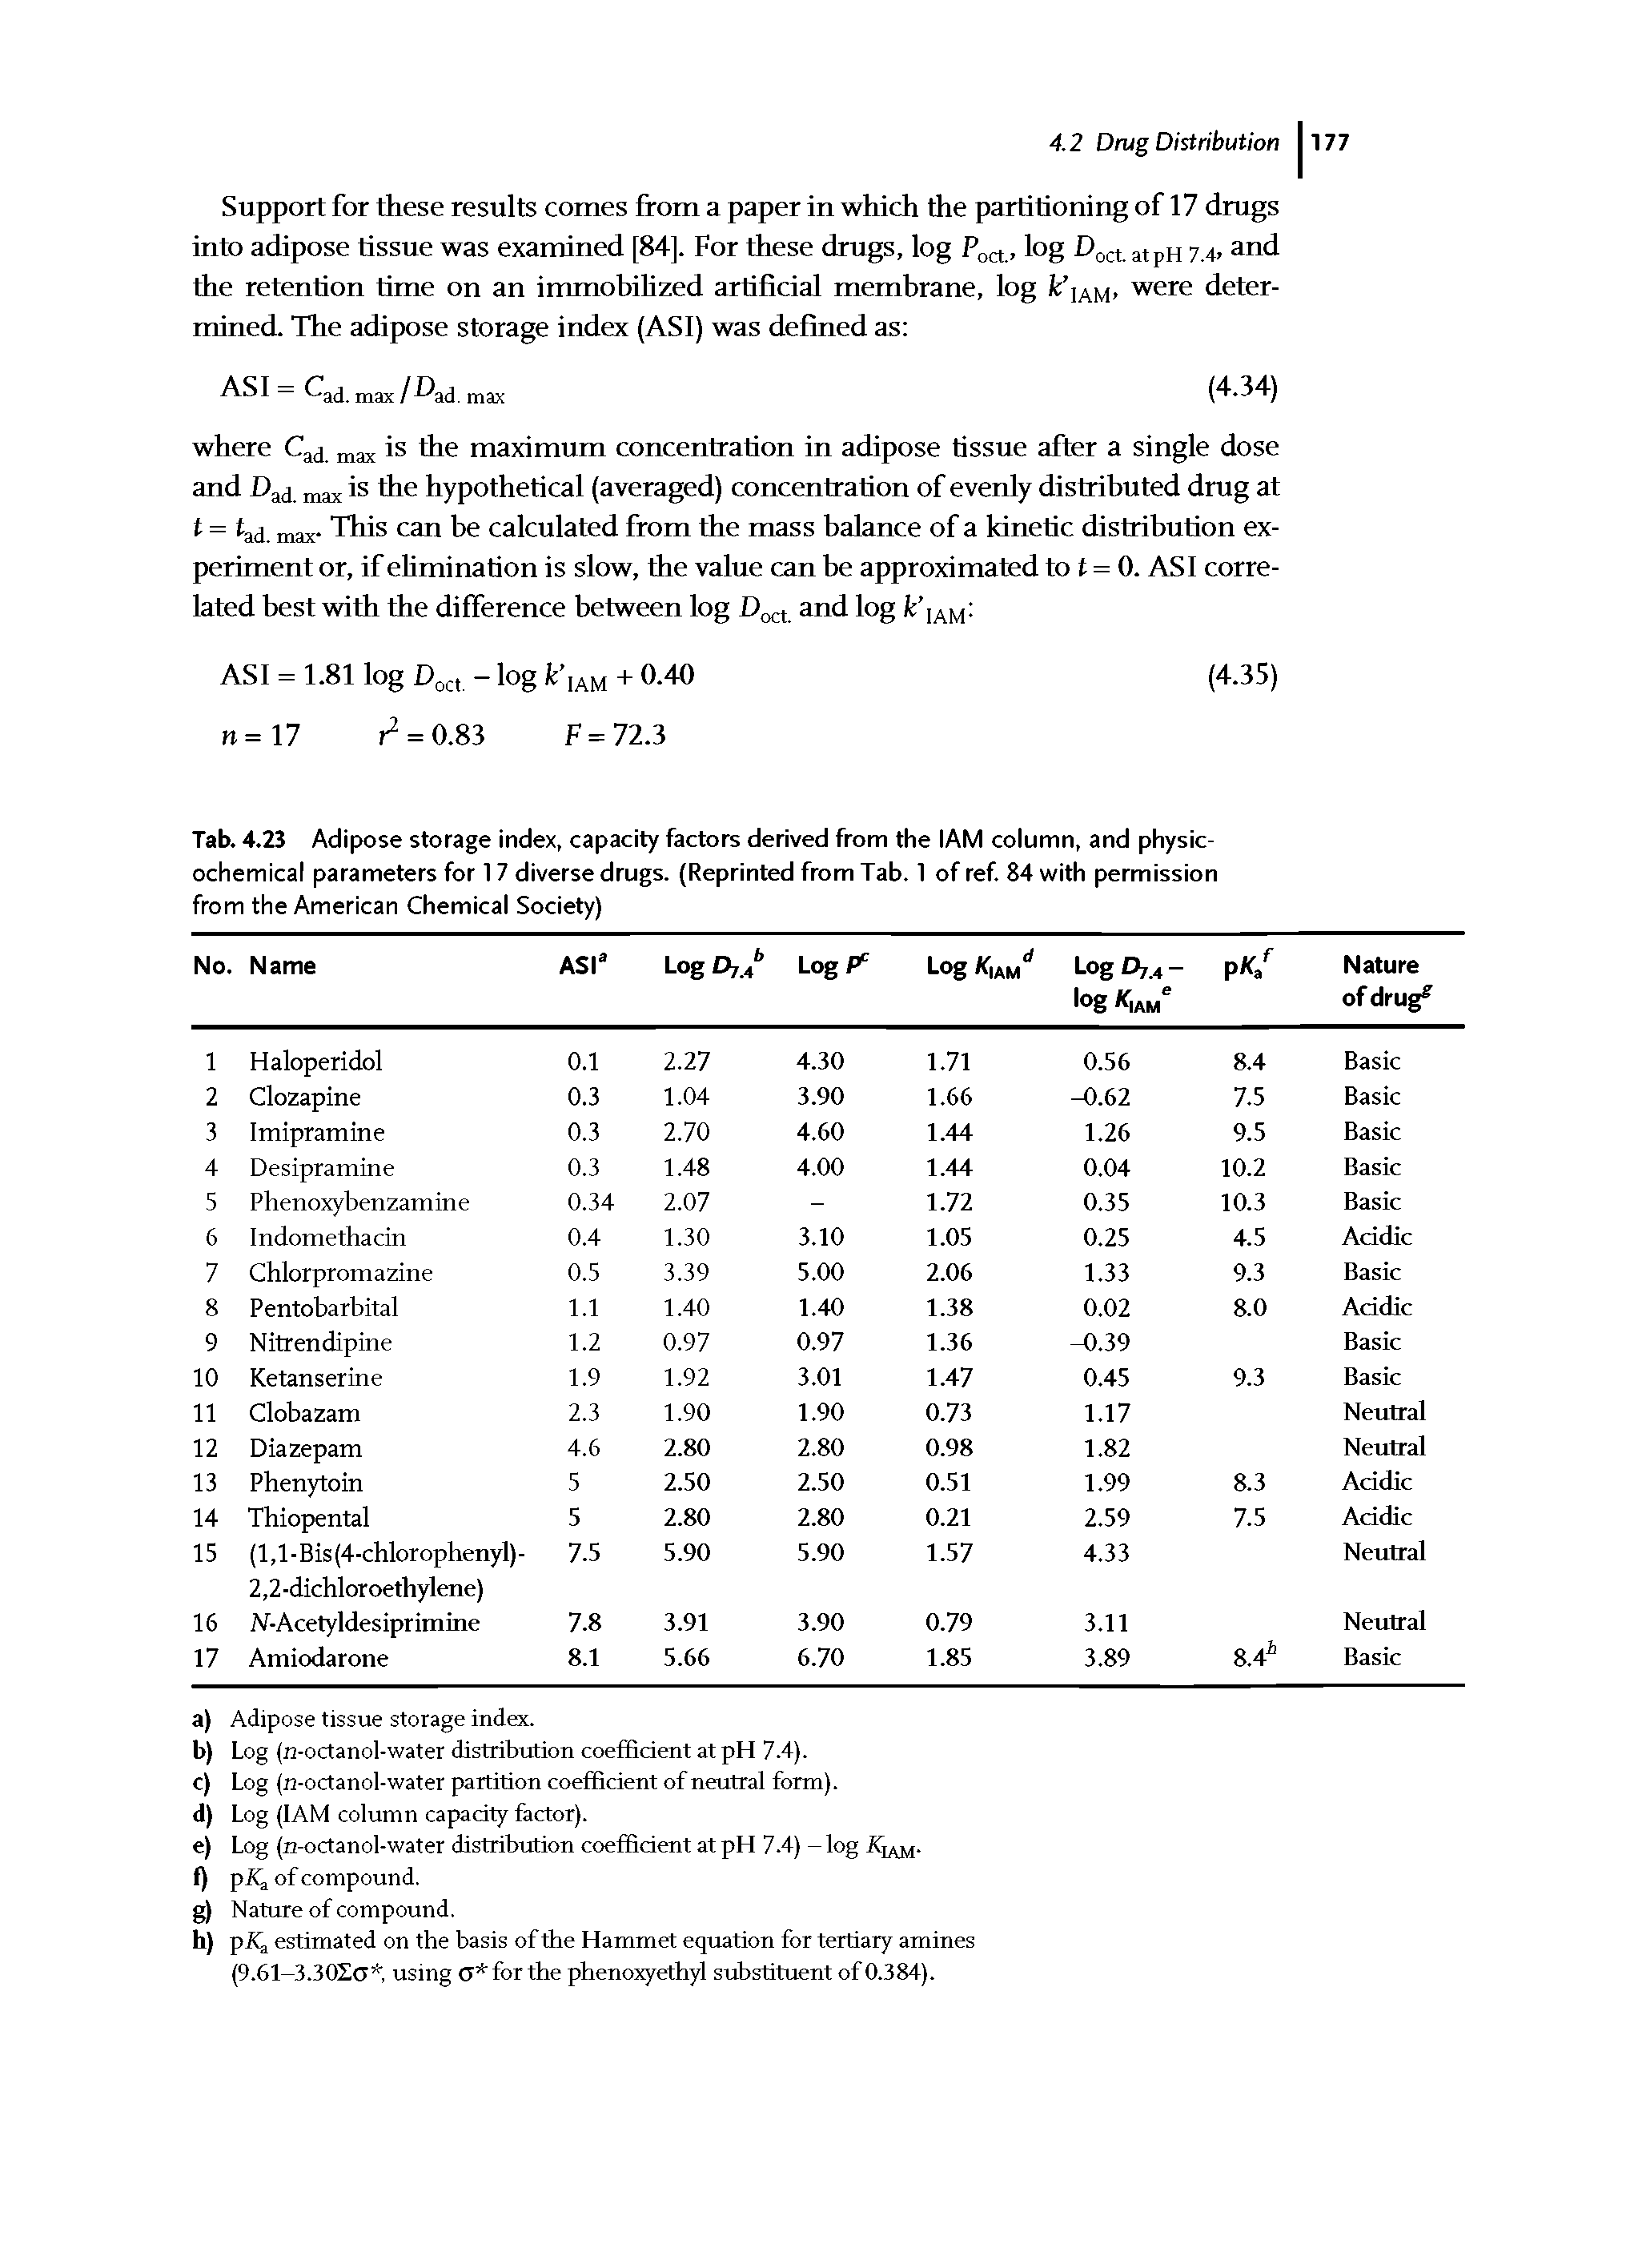 Tab. 4.23 Adipose storage index, capacity factors derived from the 1AM column, and physicochemical parameters for 17 diverse drugs. (Reprinted from Tab. 1 of ref. 84 with permission from the American Chemical Society)...